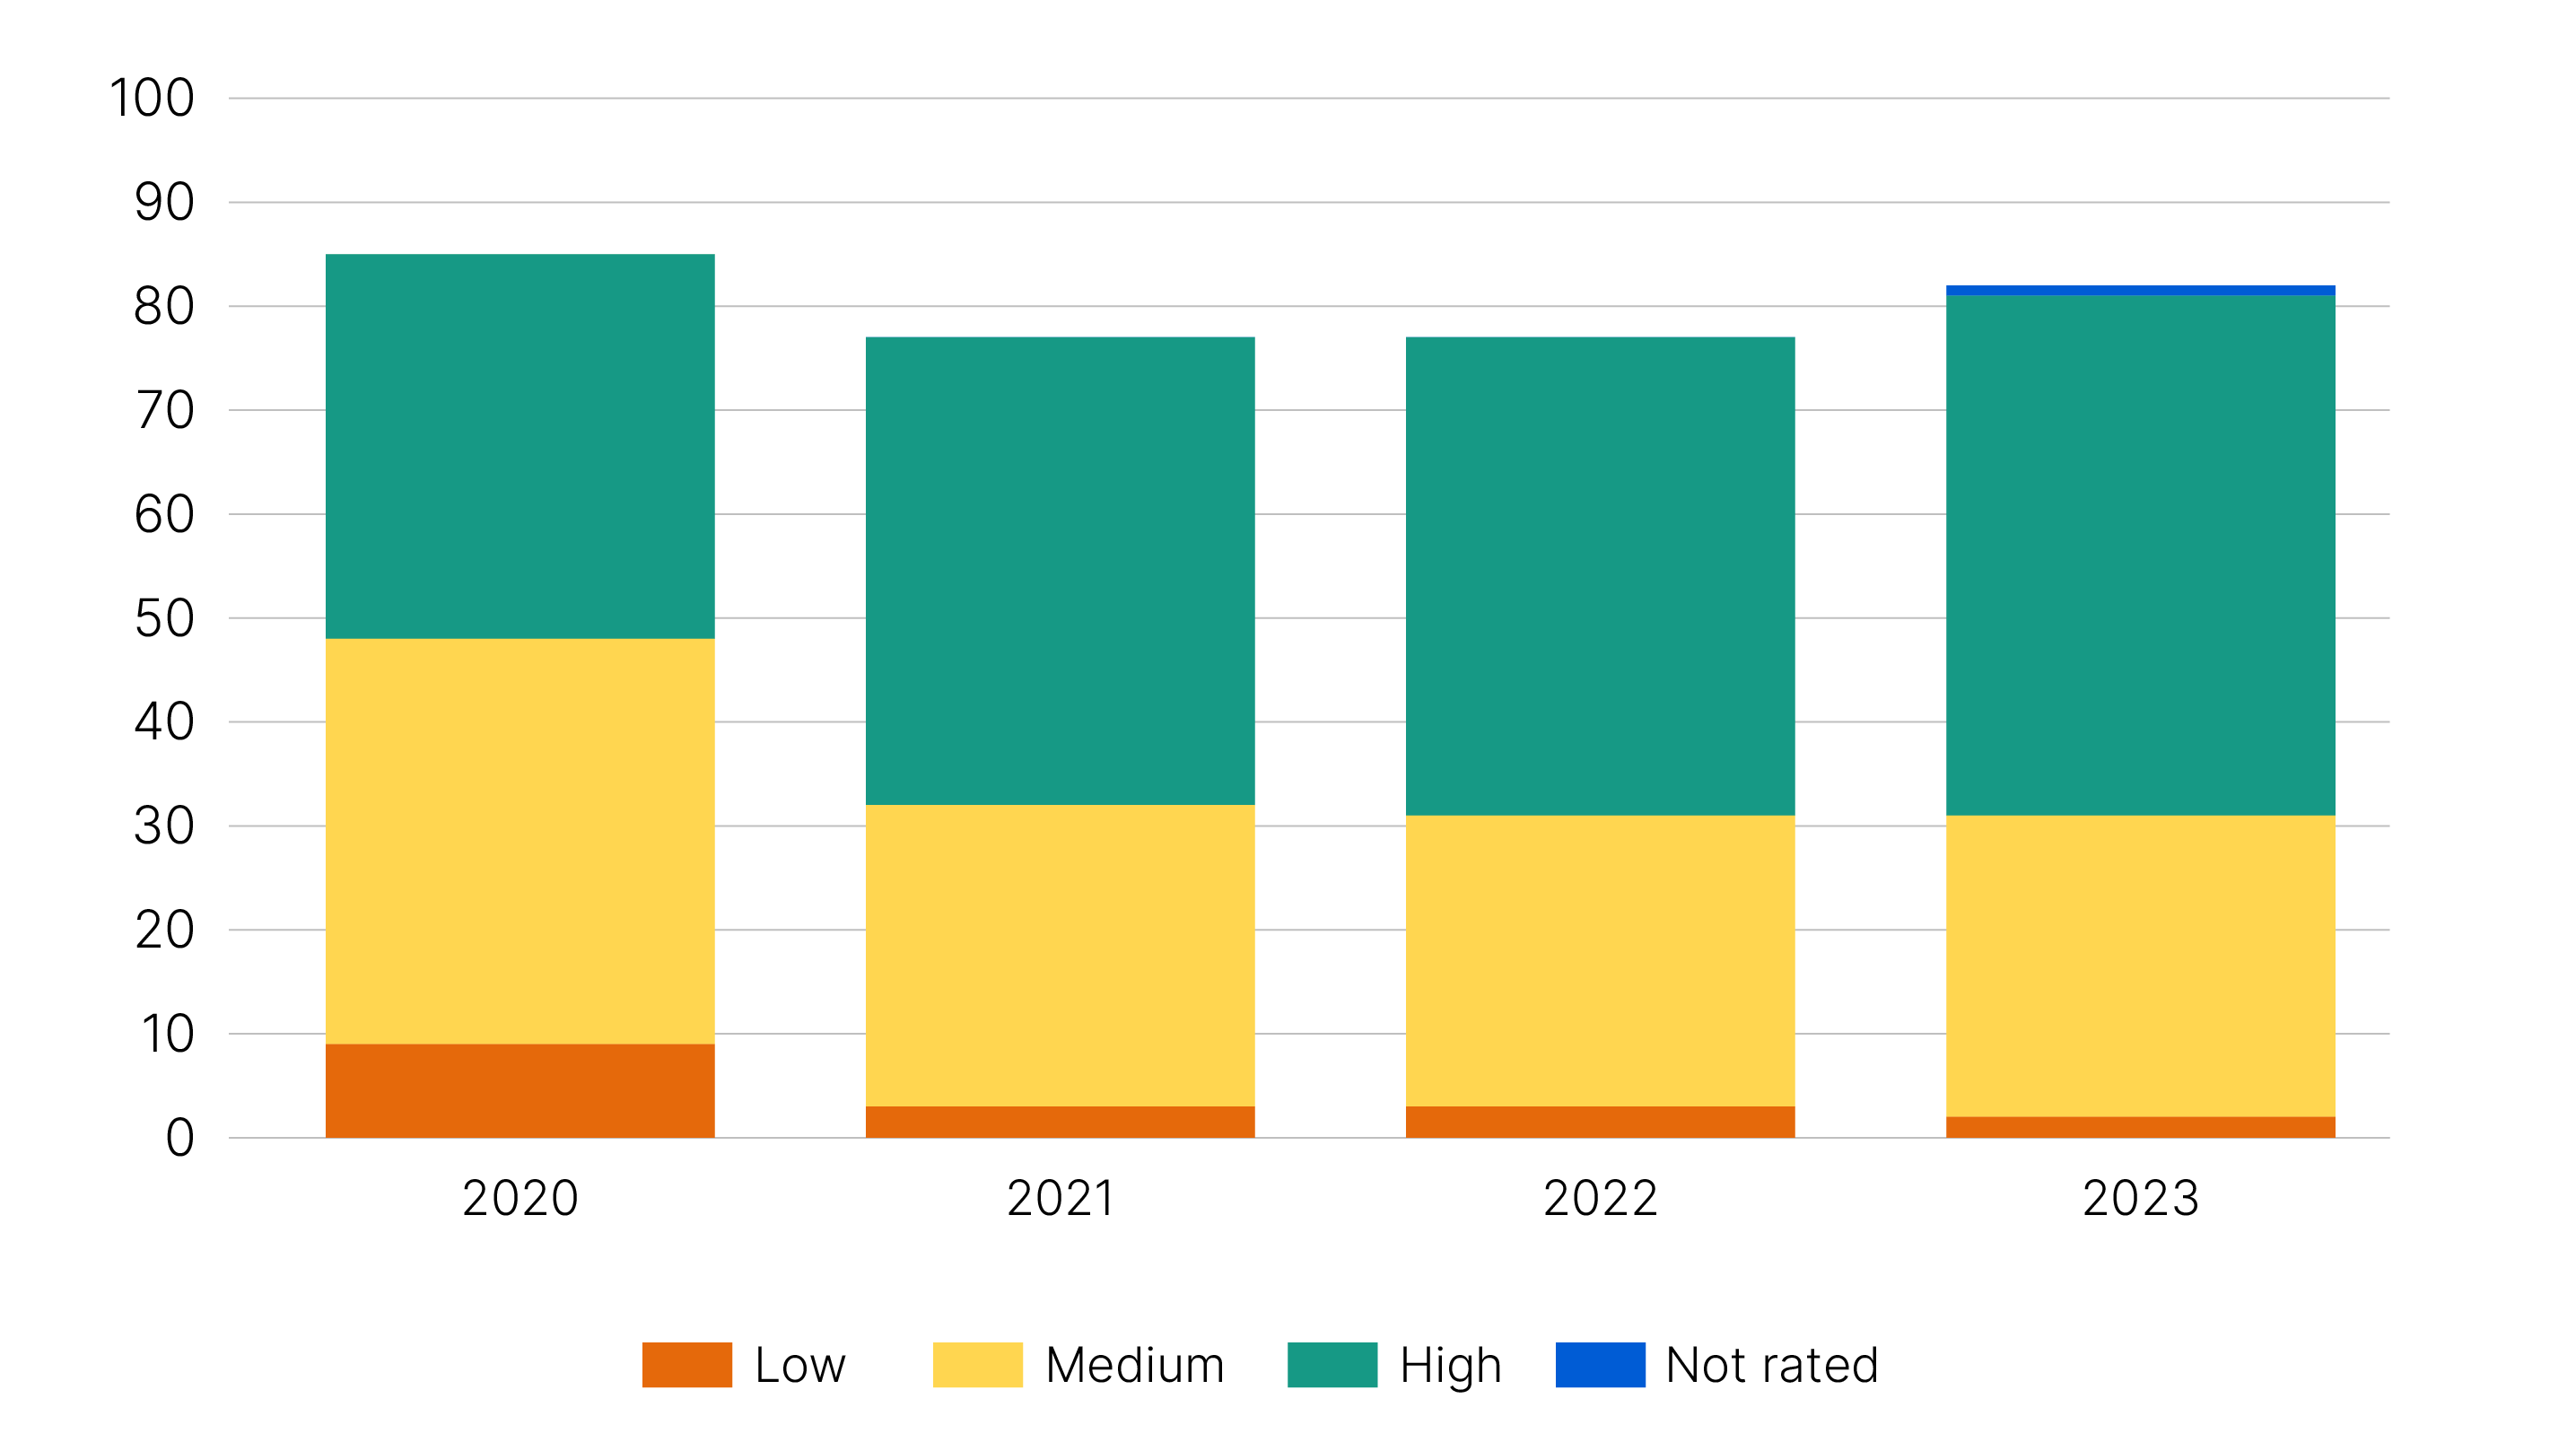 Bar graph shows alignment of tax and accounting ratings for the years 2020 – 2023